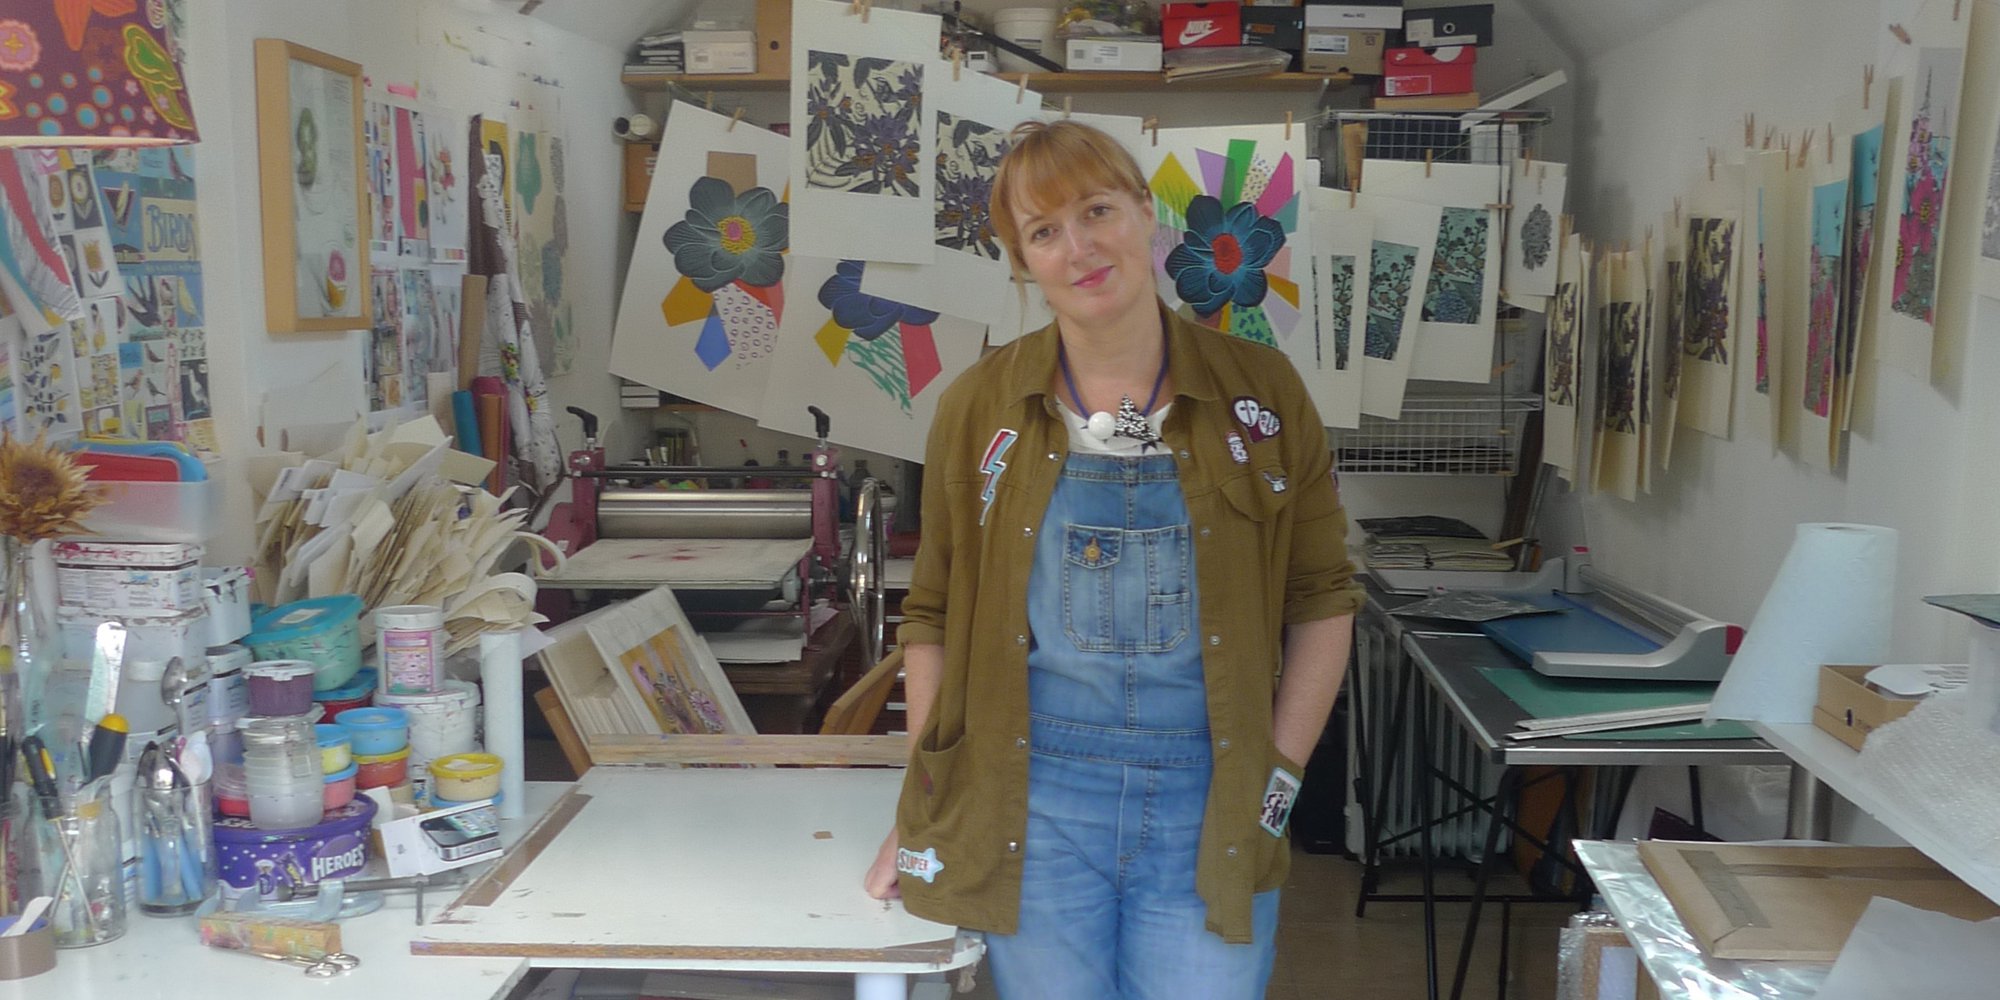 To celebrate the launch of the Cambridge Original Printmakers Biennale we speak to Kate Heiss - printmaker and organiser of the event - about all things print! 